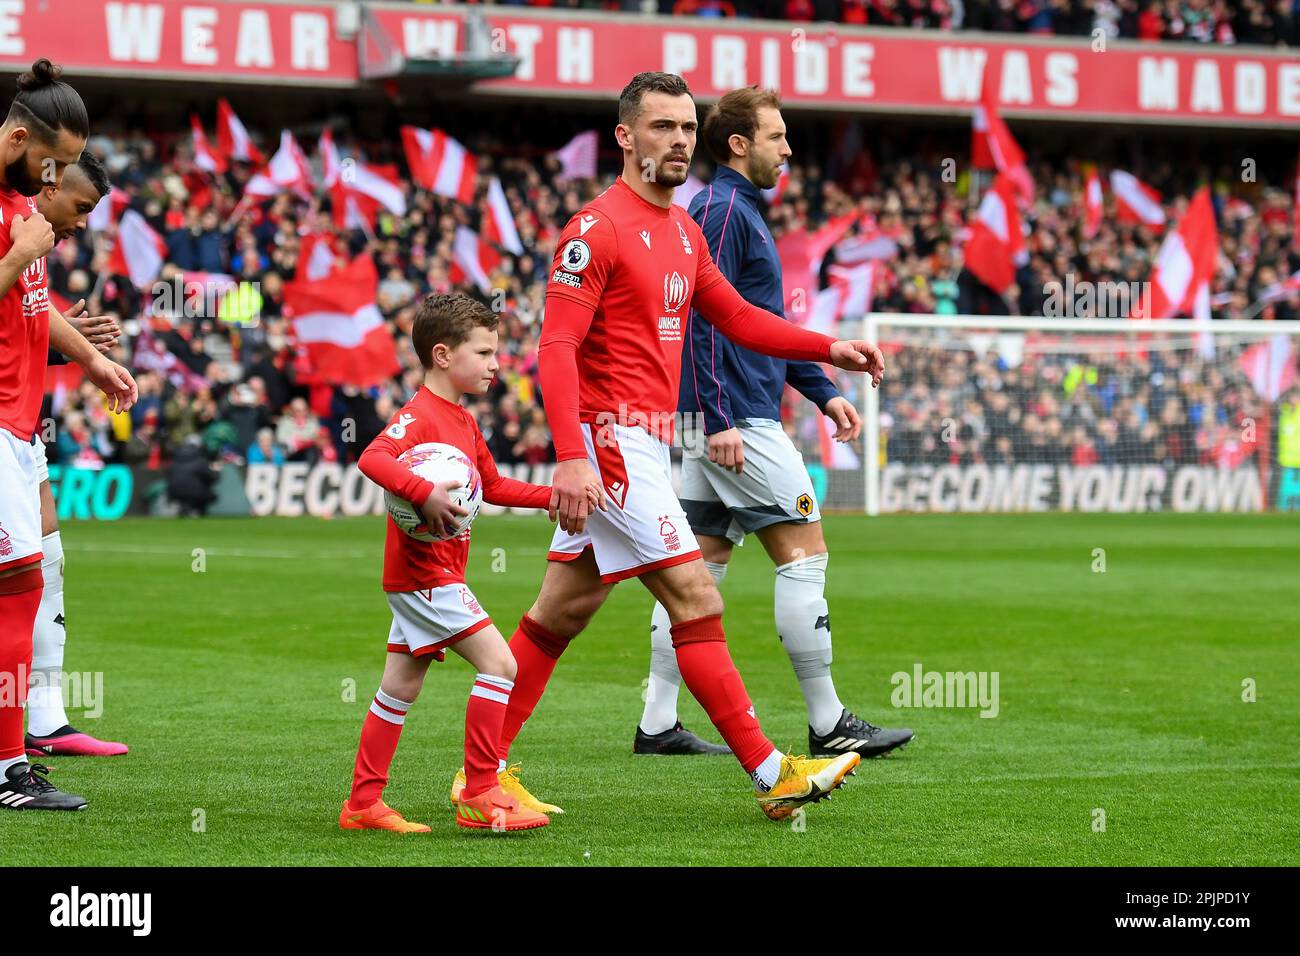 Harry Toffolo of Nottingham Forest with his son as a mascot during the Premier League match between Nottingham Forest and Wolverhampton Wanderers at the City Ground, Nottingham on Saturday 1st April 2023. (Photo: Jon Hobley | MI News) Credit: MI News & Sport /Alamy Live News Stock Photo